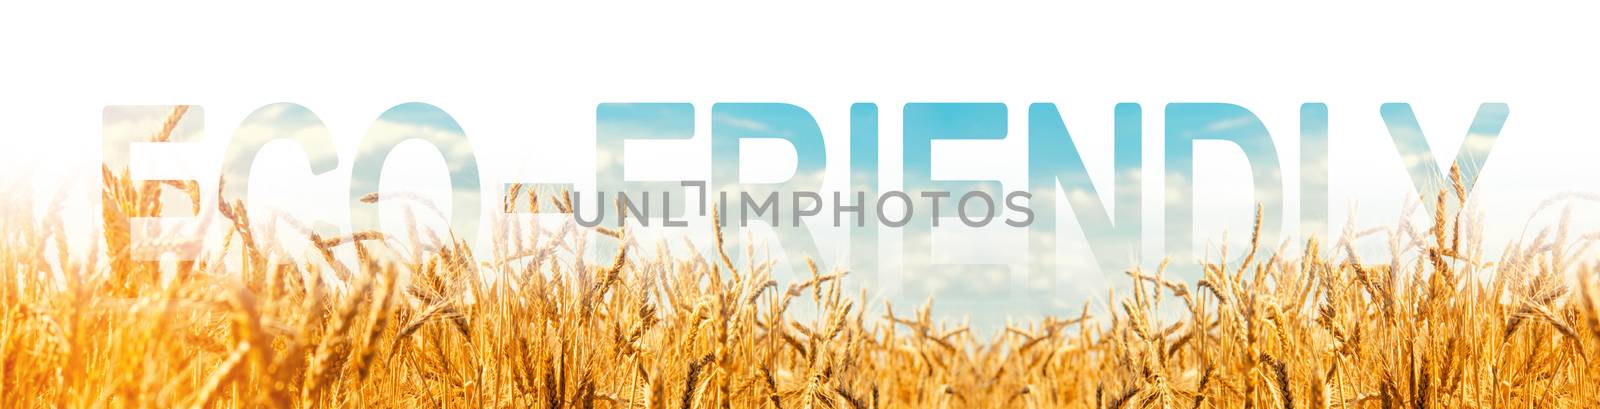 The inscription Eco-friendly on the background of a wheat plantation. Environmentally friendly harvest, quality control. yellow wheat grows in the soil. eco-friendly agricultural products. by iLixe48